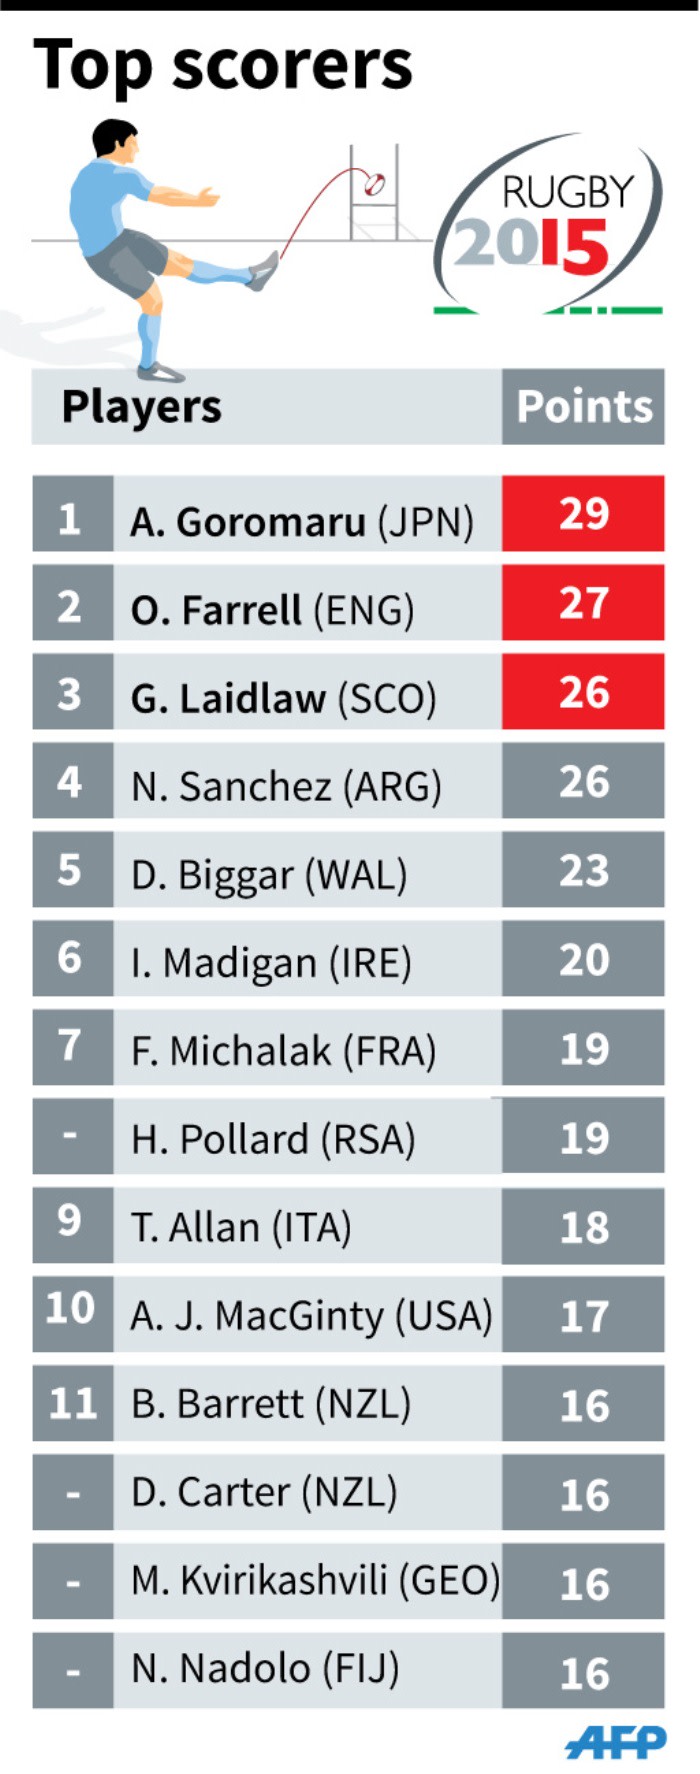 Top scorers in the 2015 Rugby World Cup so far.